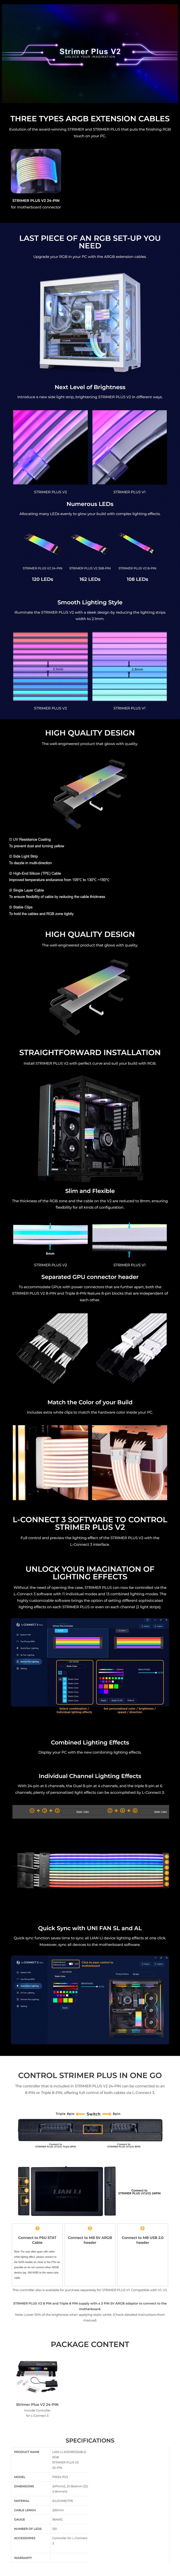 A large marketing image providing additional information about the product Lian Li Strimer Plus V2 8-Pin Triple PCIe ARGB LED Extension Cable - Additional alt info not provided